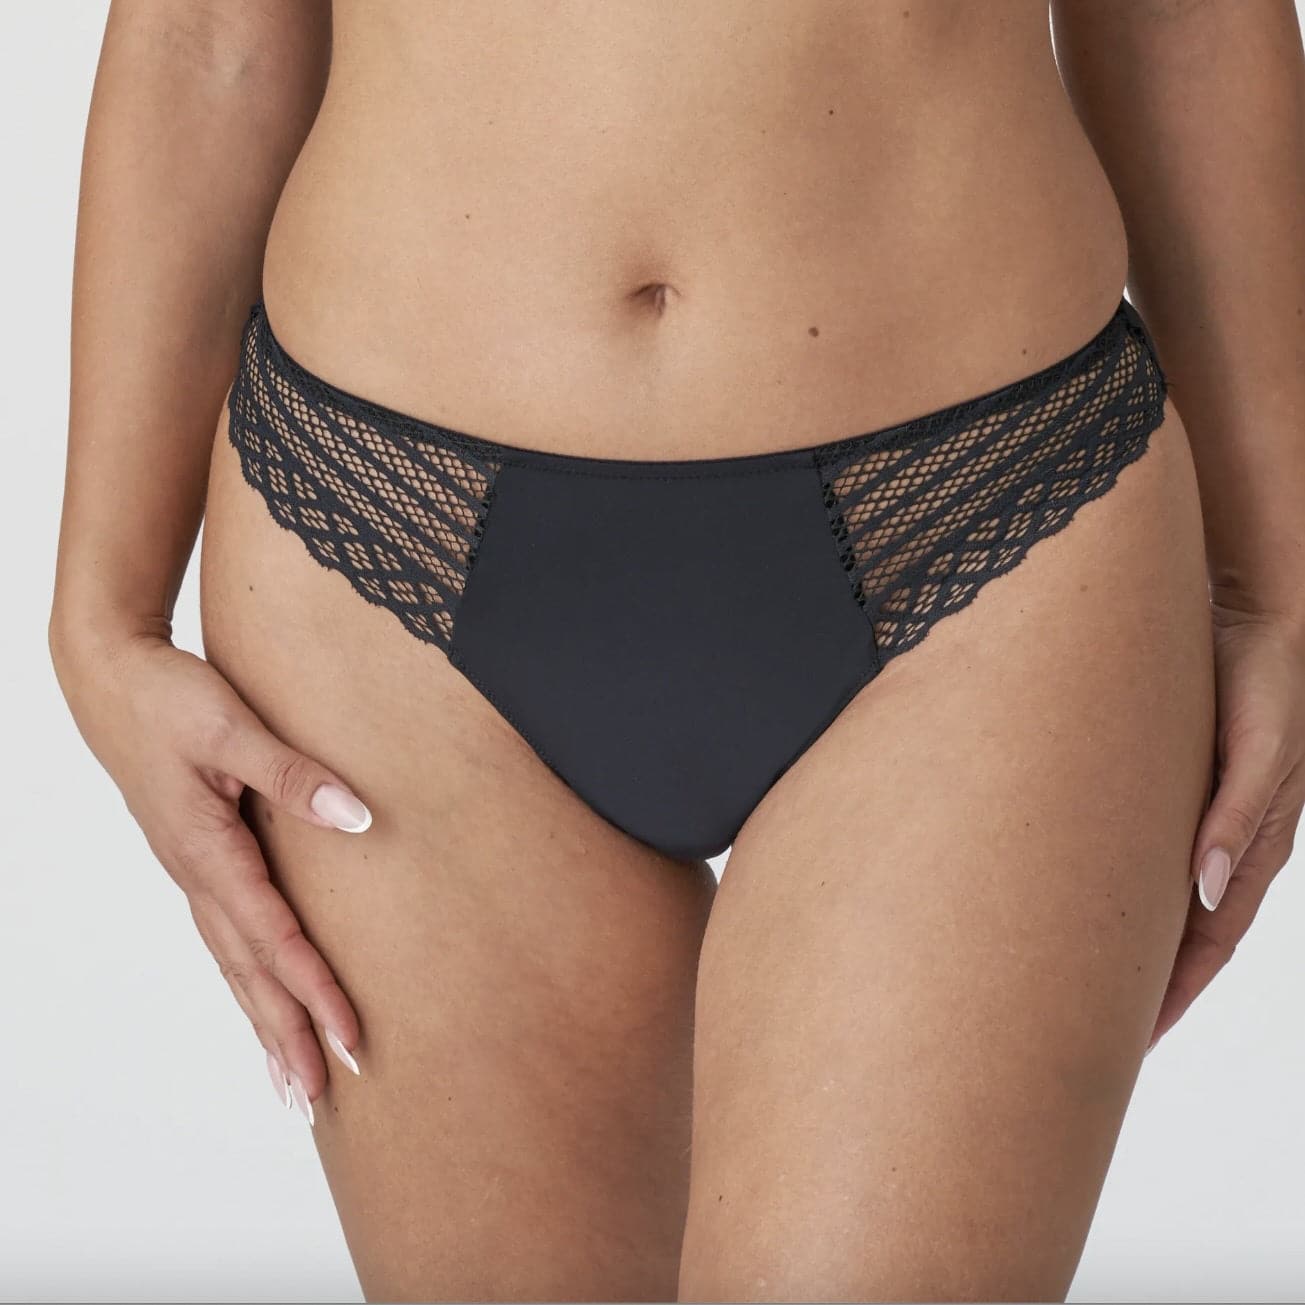 Prima Donna Twist East End Thong in Black 0641930-Panties-Prima Donna-Black-Small-Anna Bella Fine Lingerie, Reveal Your Most Gorgeous Self!